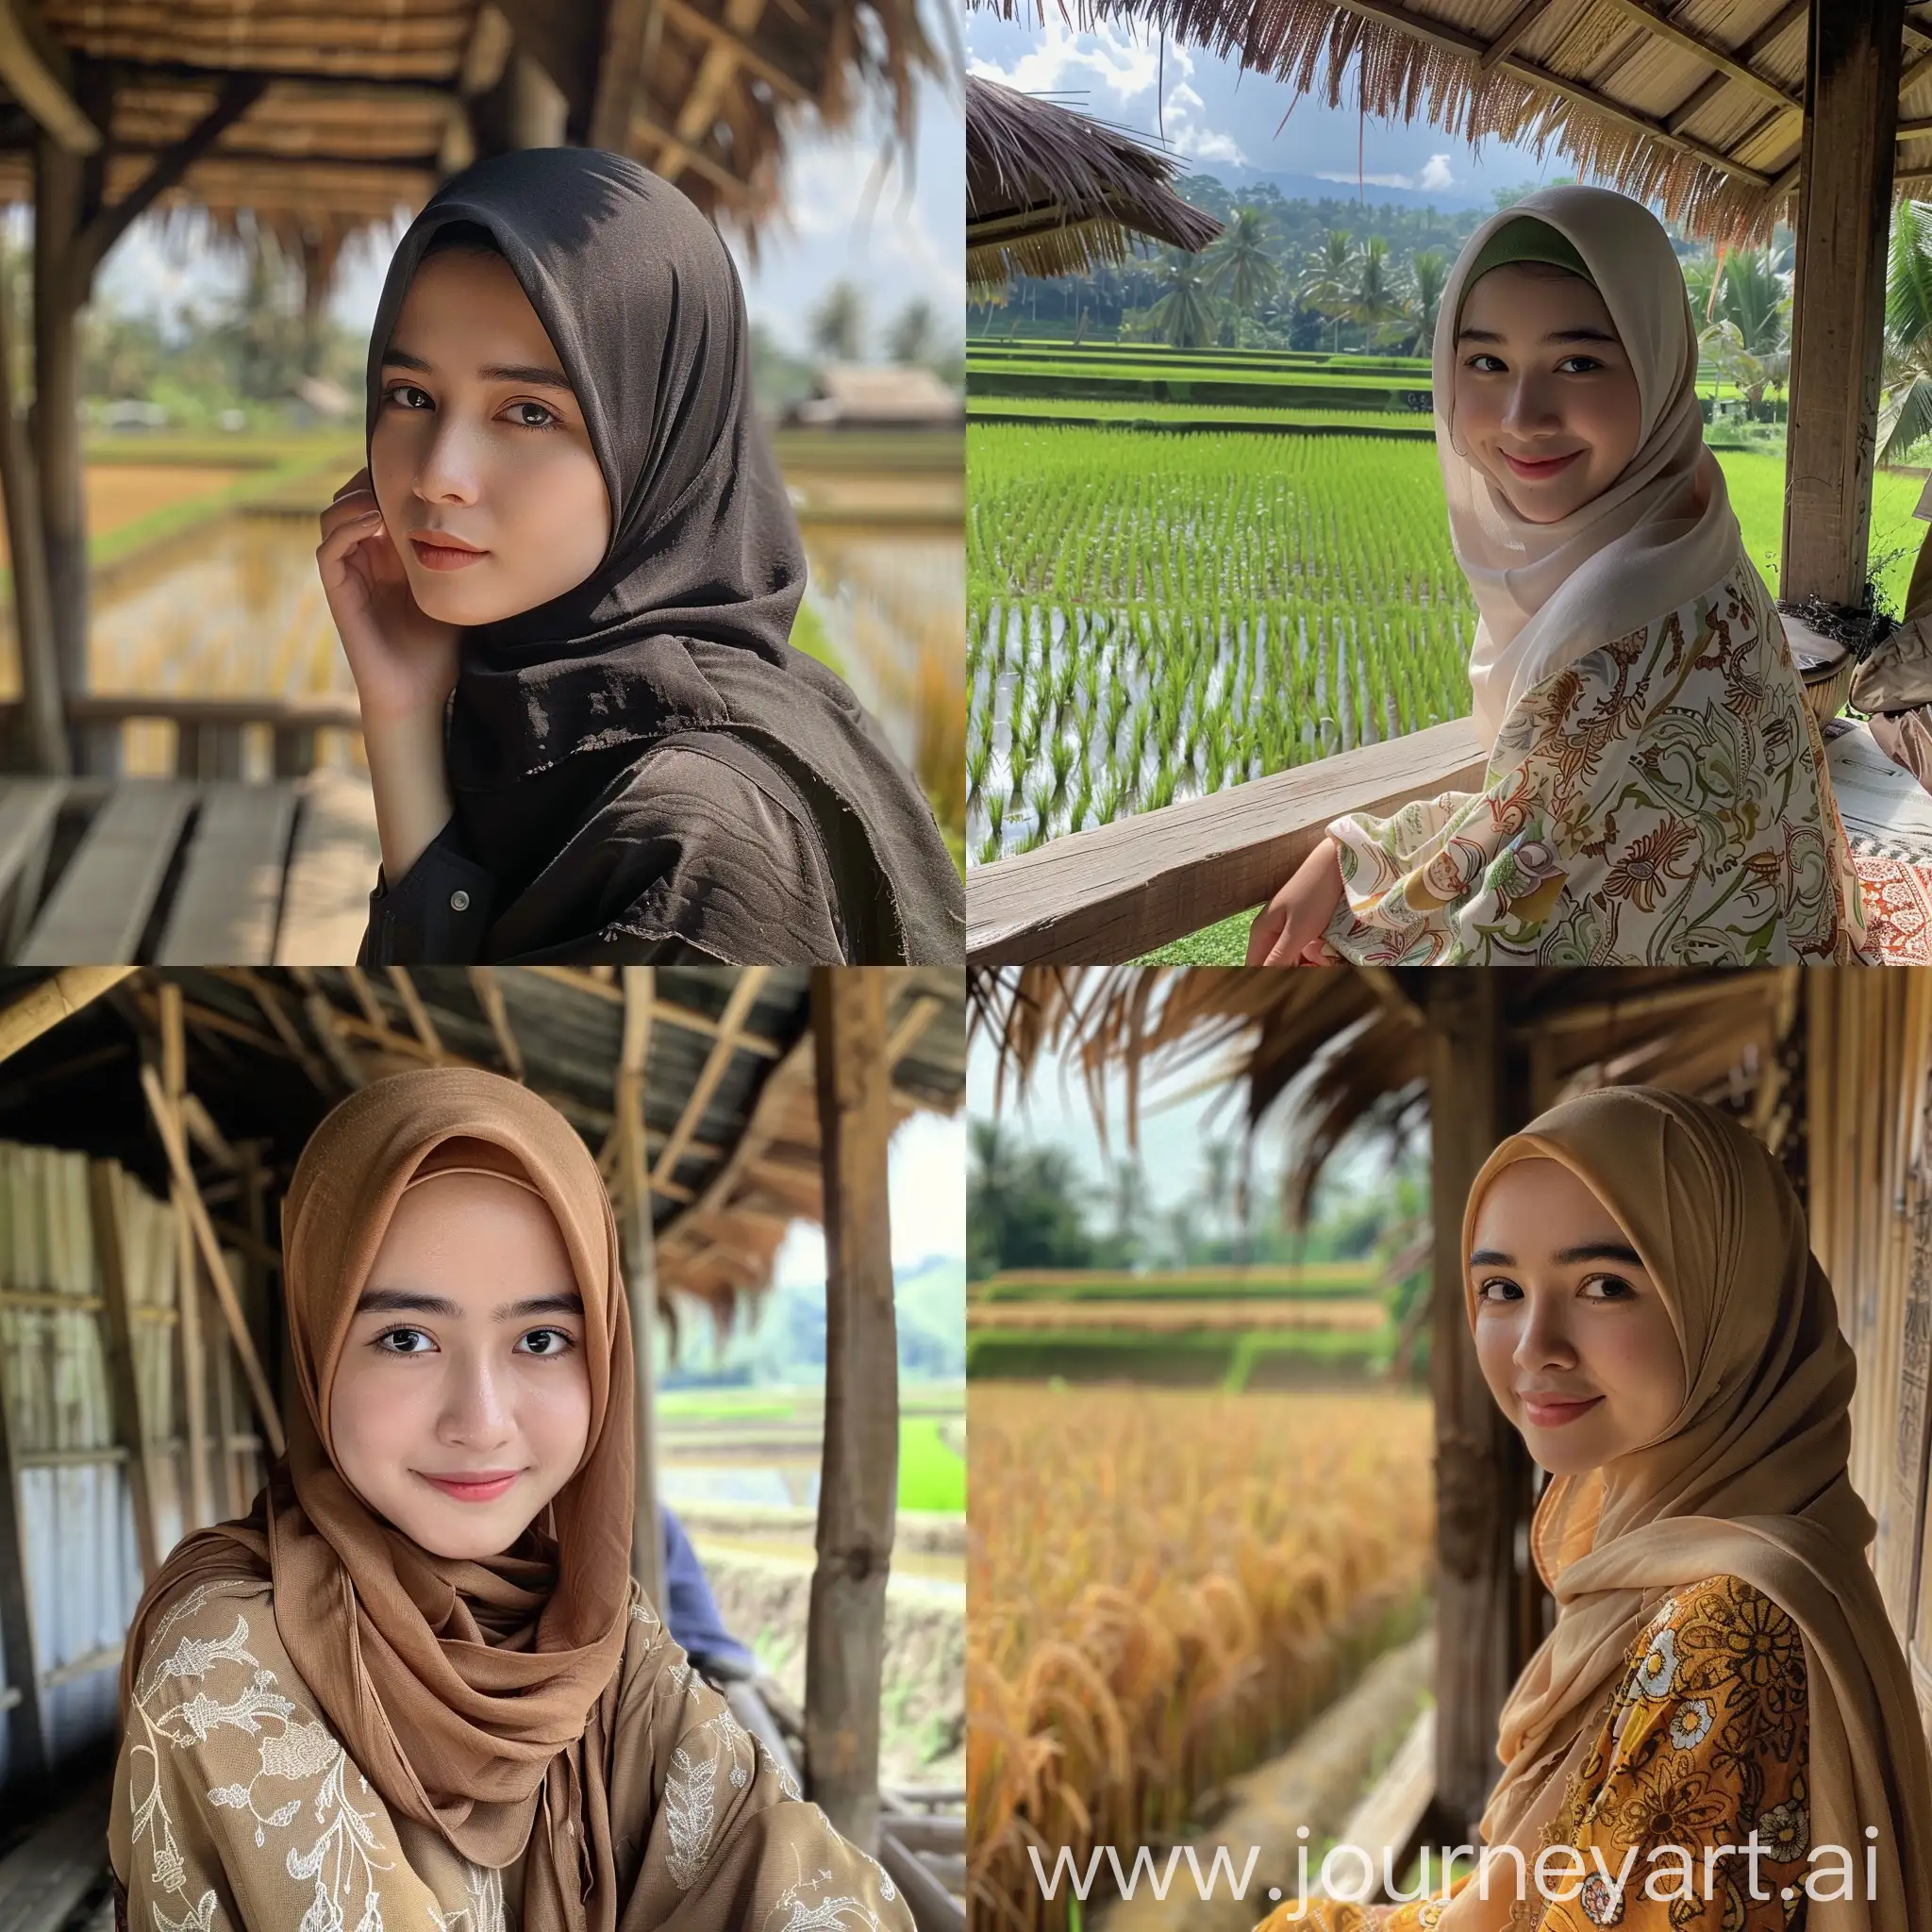 Indonesian-Influencer-in-Rice-Field-Hut-Selfie-with-Natural-Makeup